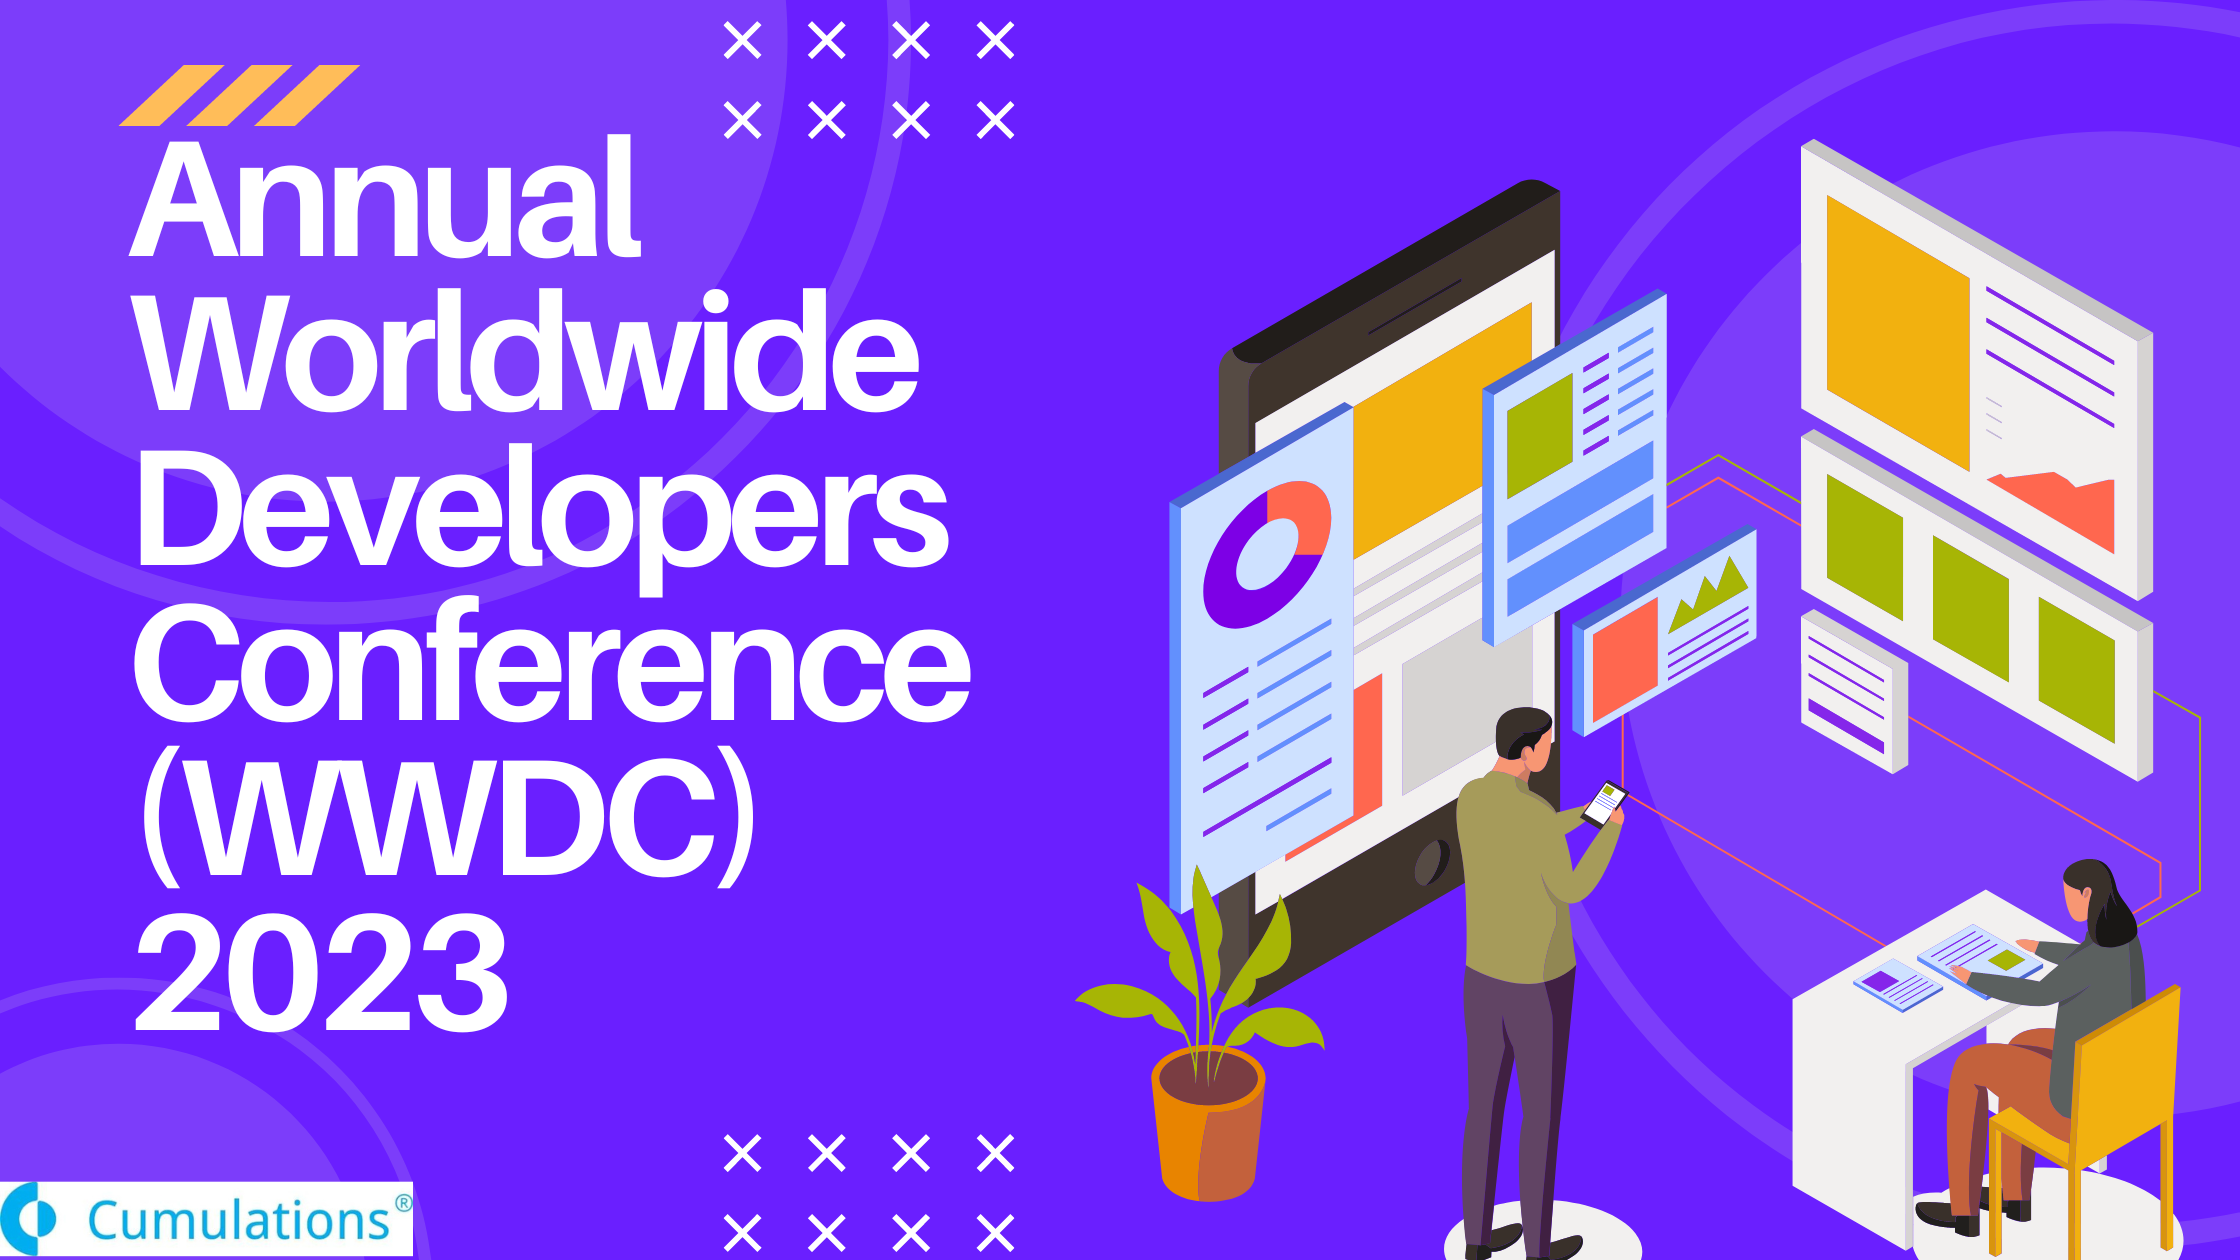 Worldwide Developers Conference